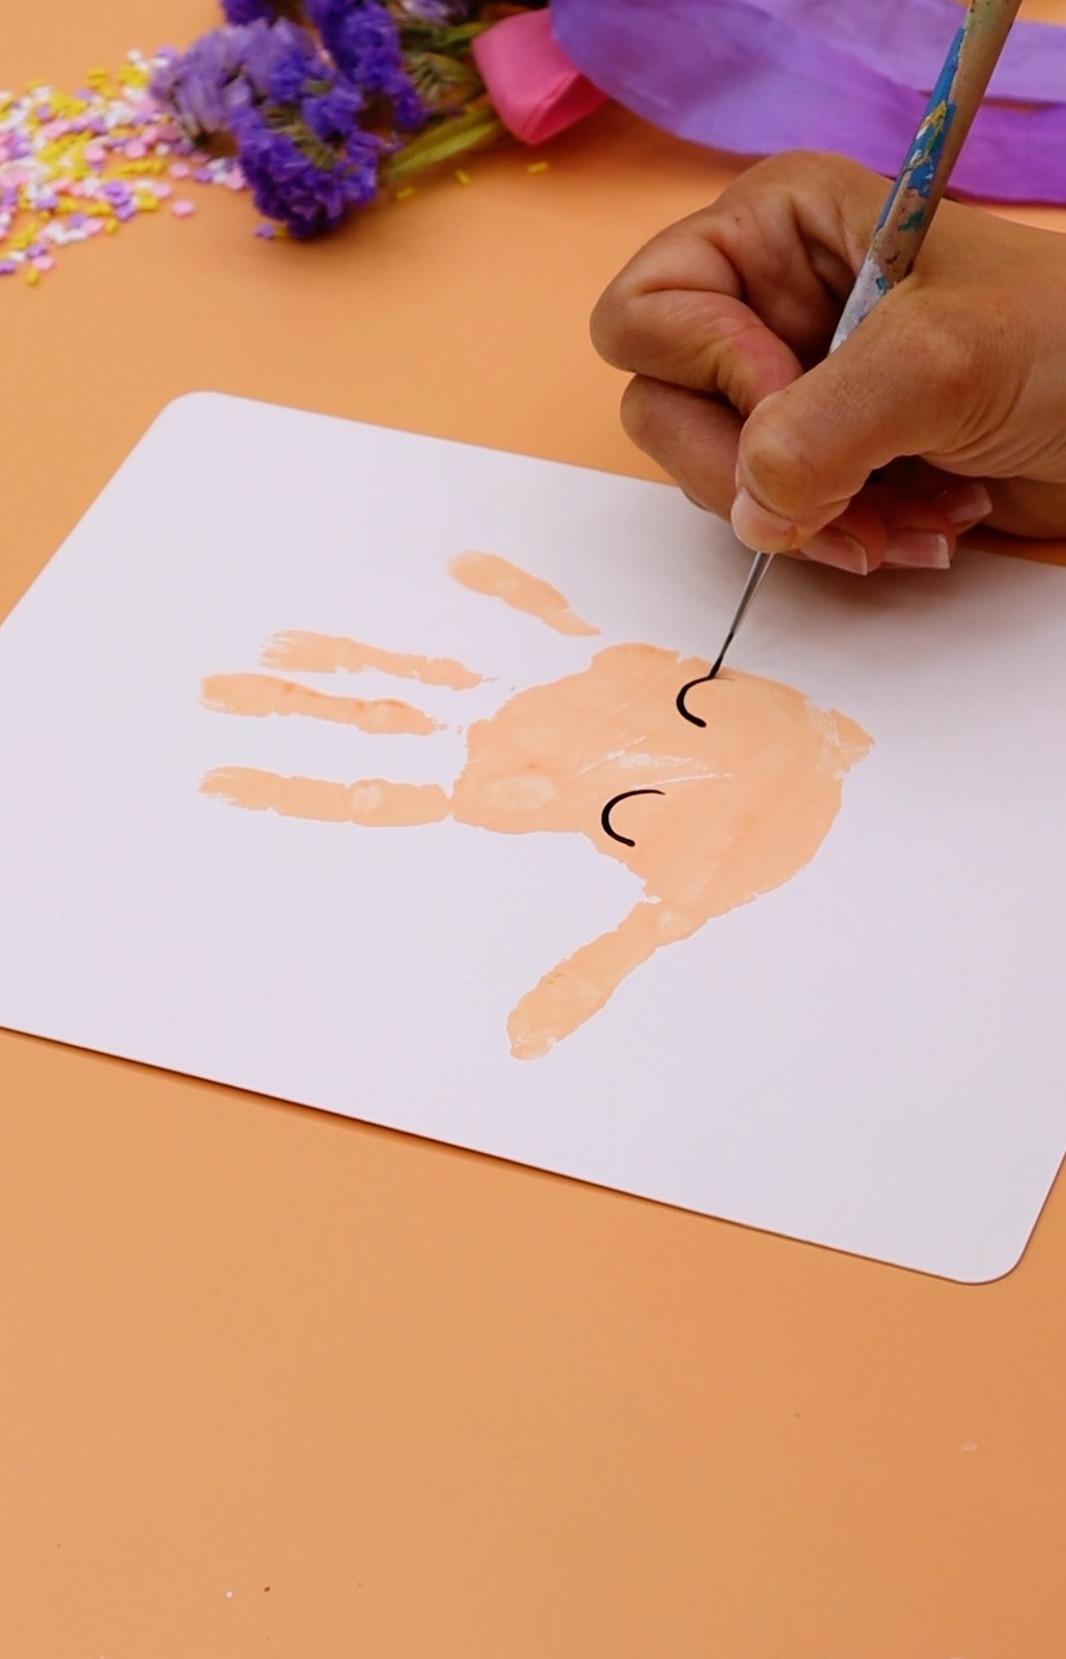 Drawing 2 arches onto a handprint 